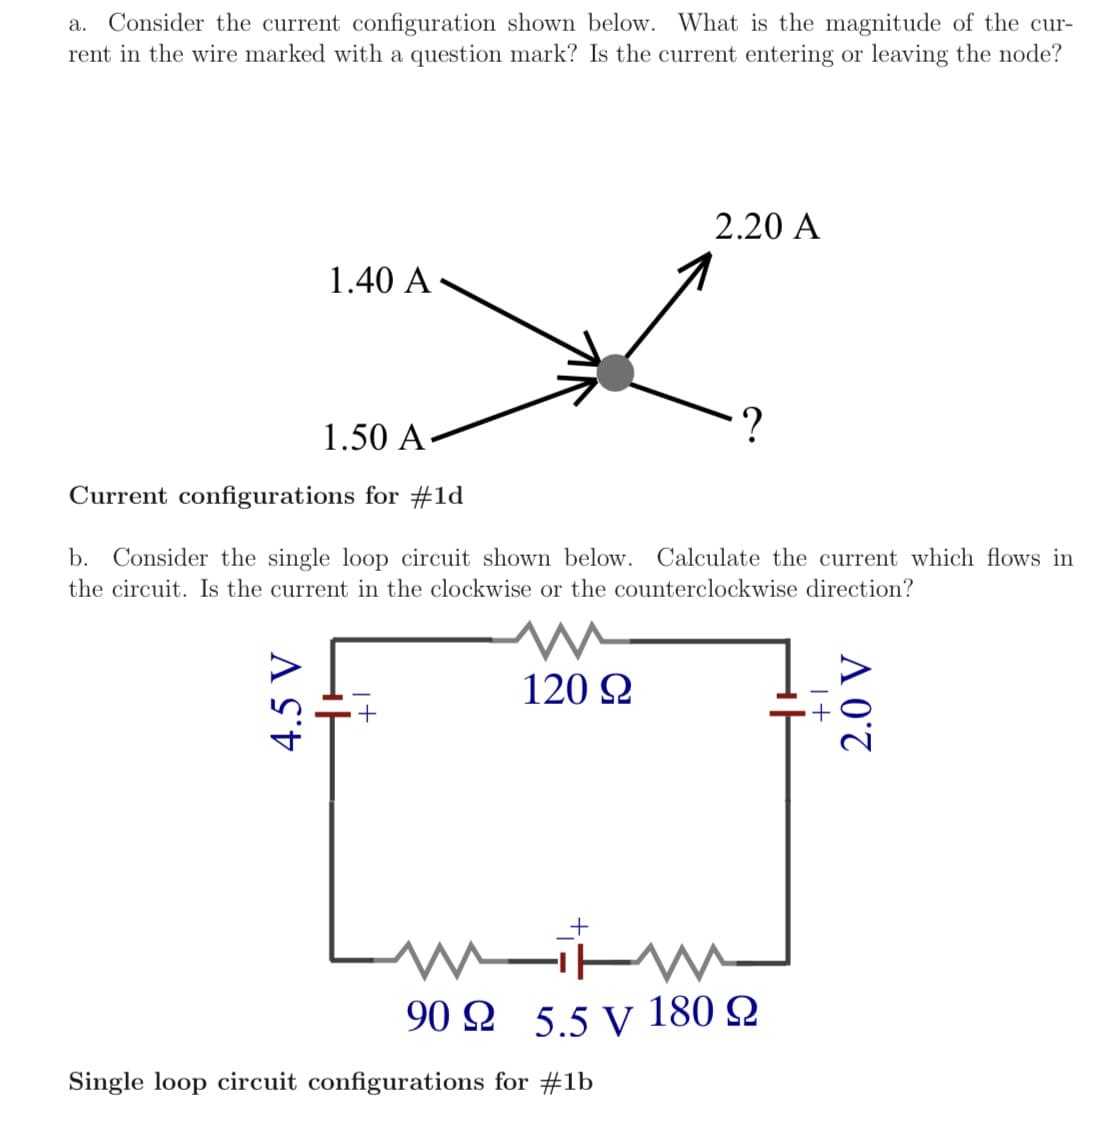 a. Consider the current configuration shown below. What is the magnitude of the cur-
rent in the wire marked with a question mark? Is the current entering or leaving the node?
2.20 A
1.40 A
1.50 A-
Current configurations for #1d
b. Consider the single loop circuit shown below. Calculate the current which flows in
the circuit. Is the current in the clockwise or the counterclockwise direction?
120 2
90 Ω 5.5 V 180 Ω
Single loop circuit configurations for #1b
